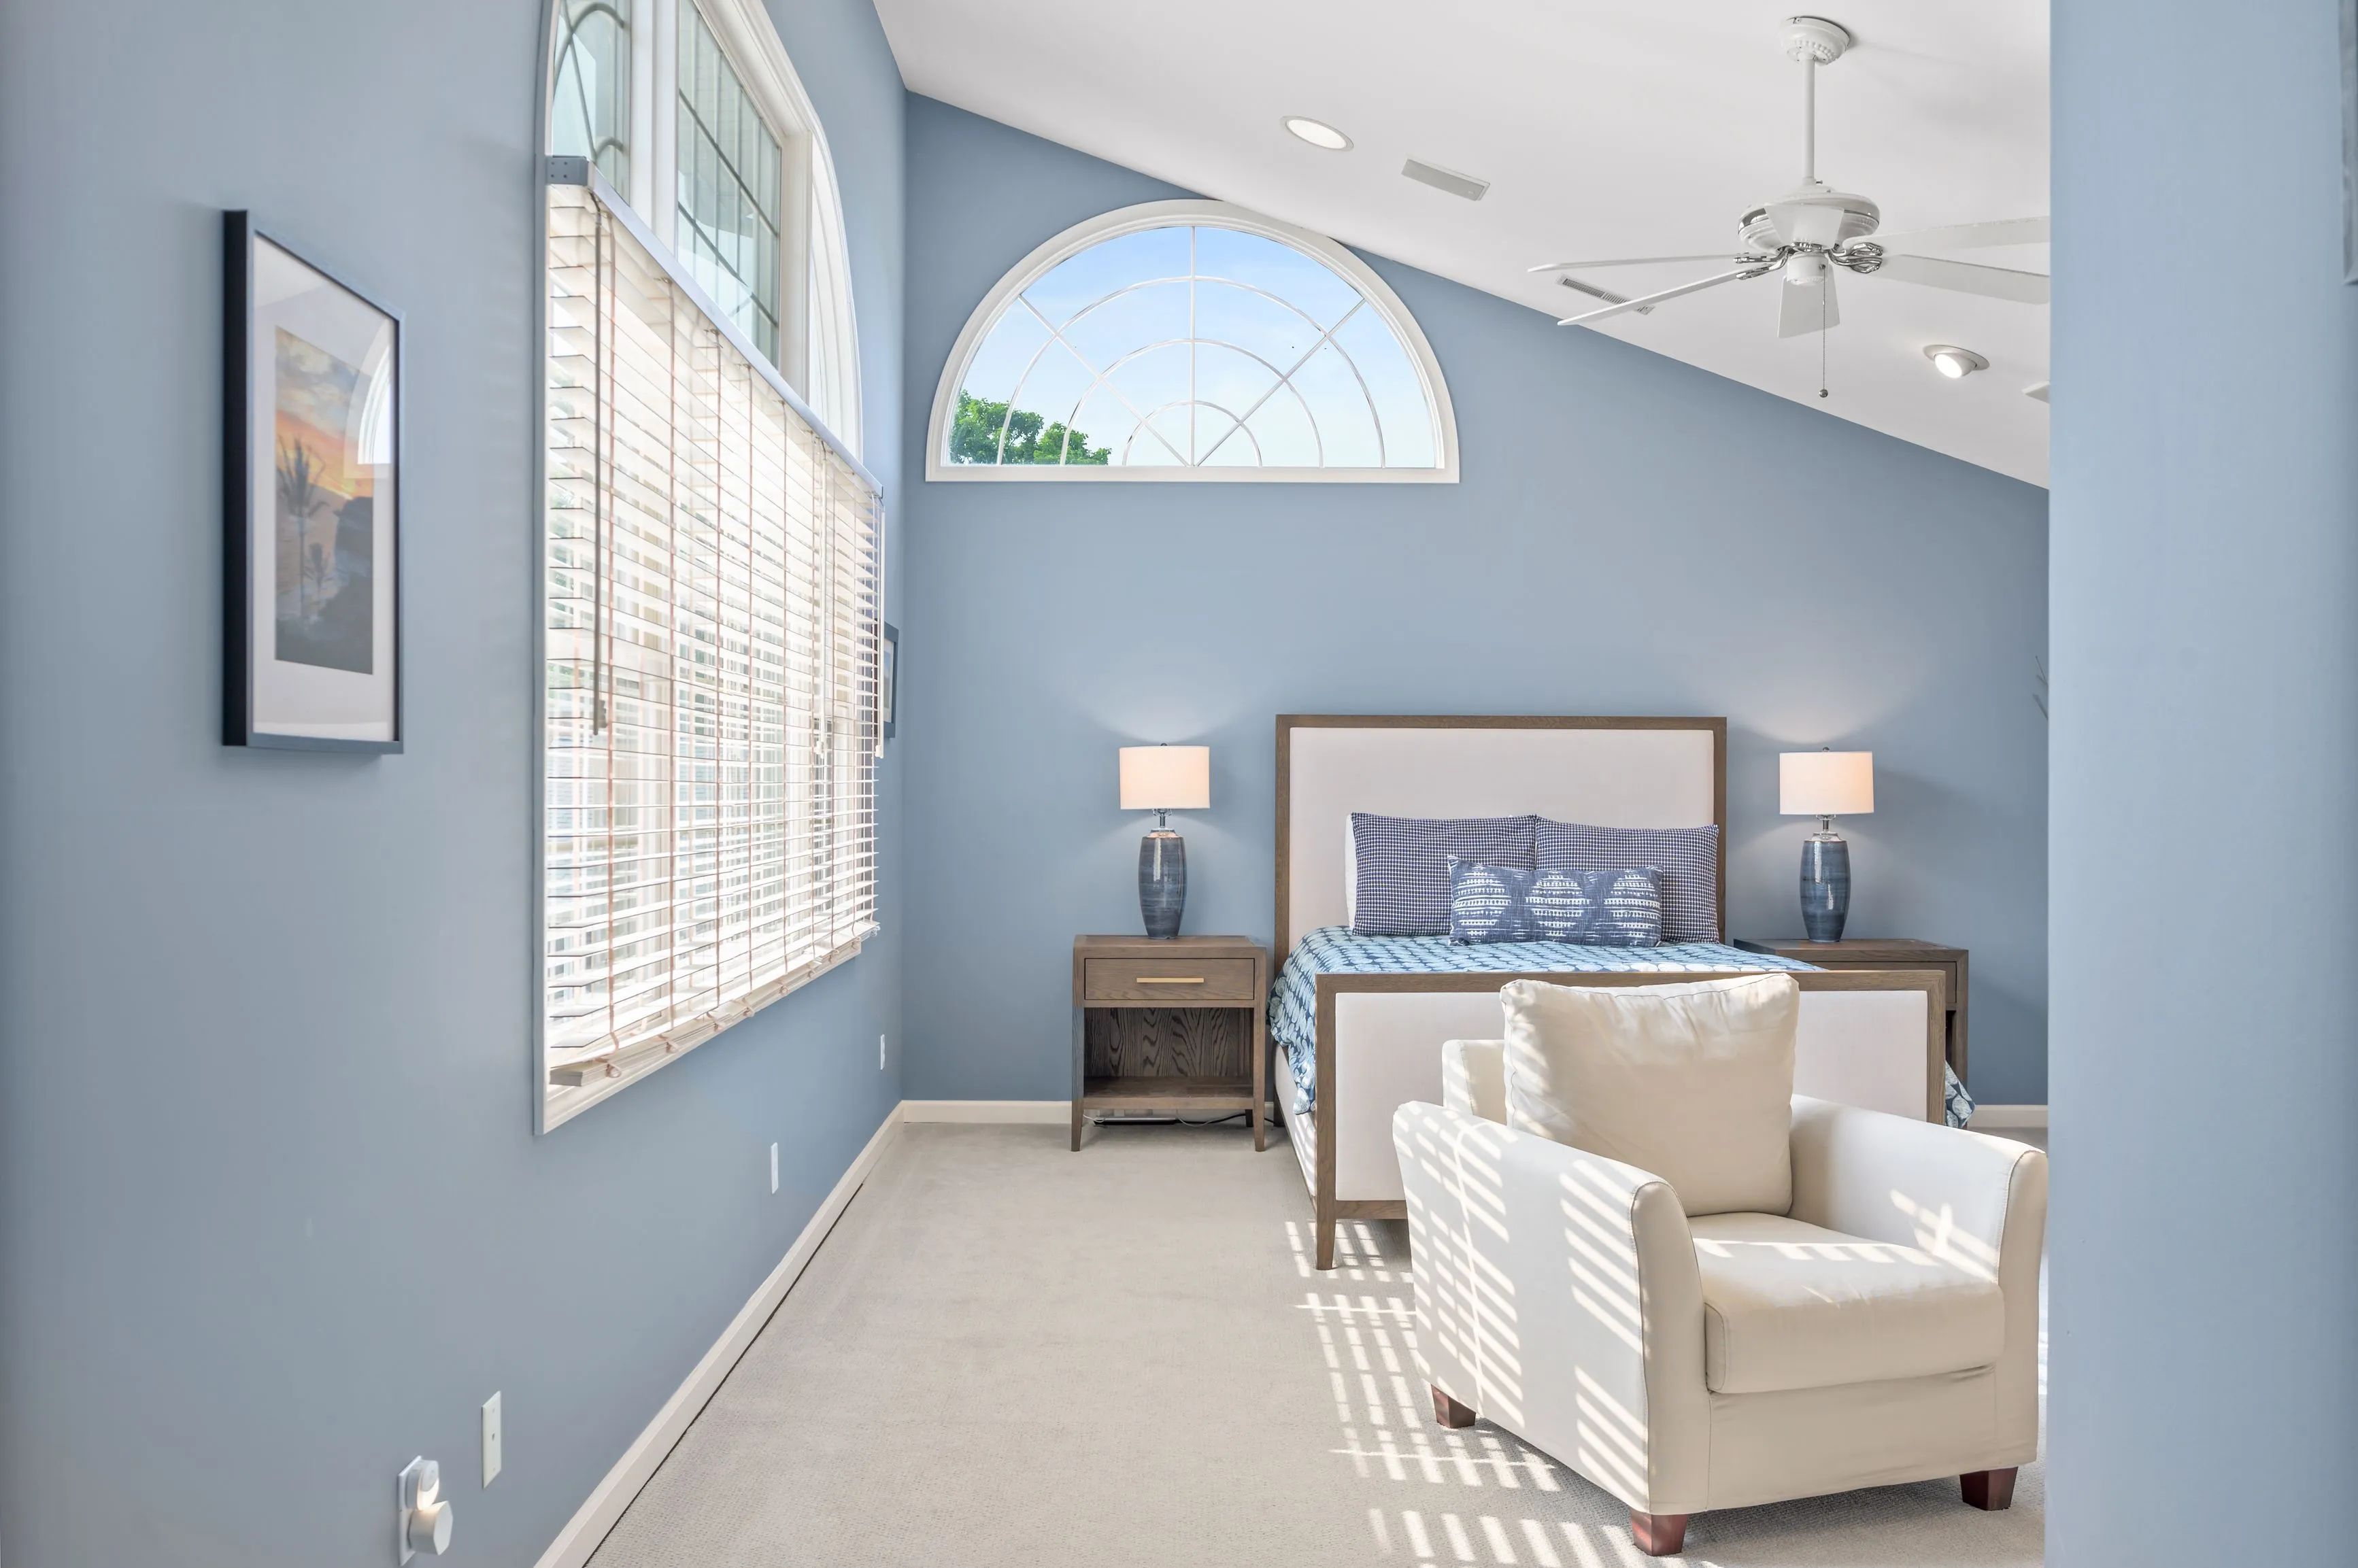 Elegant bedroom interior with light blue walls, large bed with headboard, armchair, and high ceiling with fan.